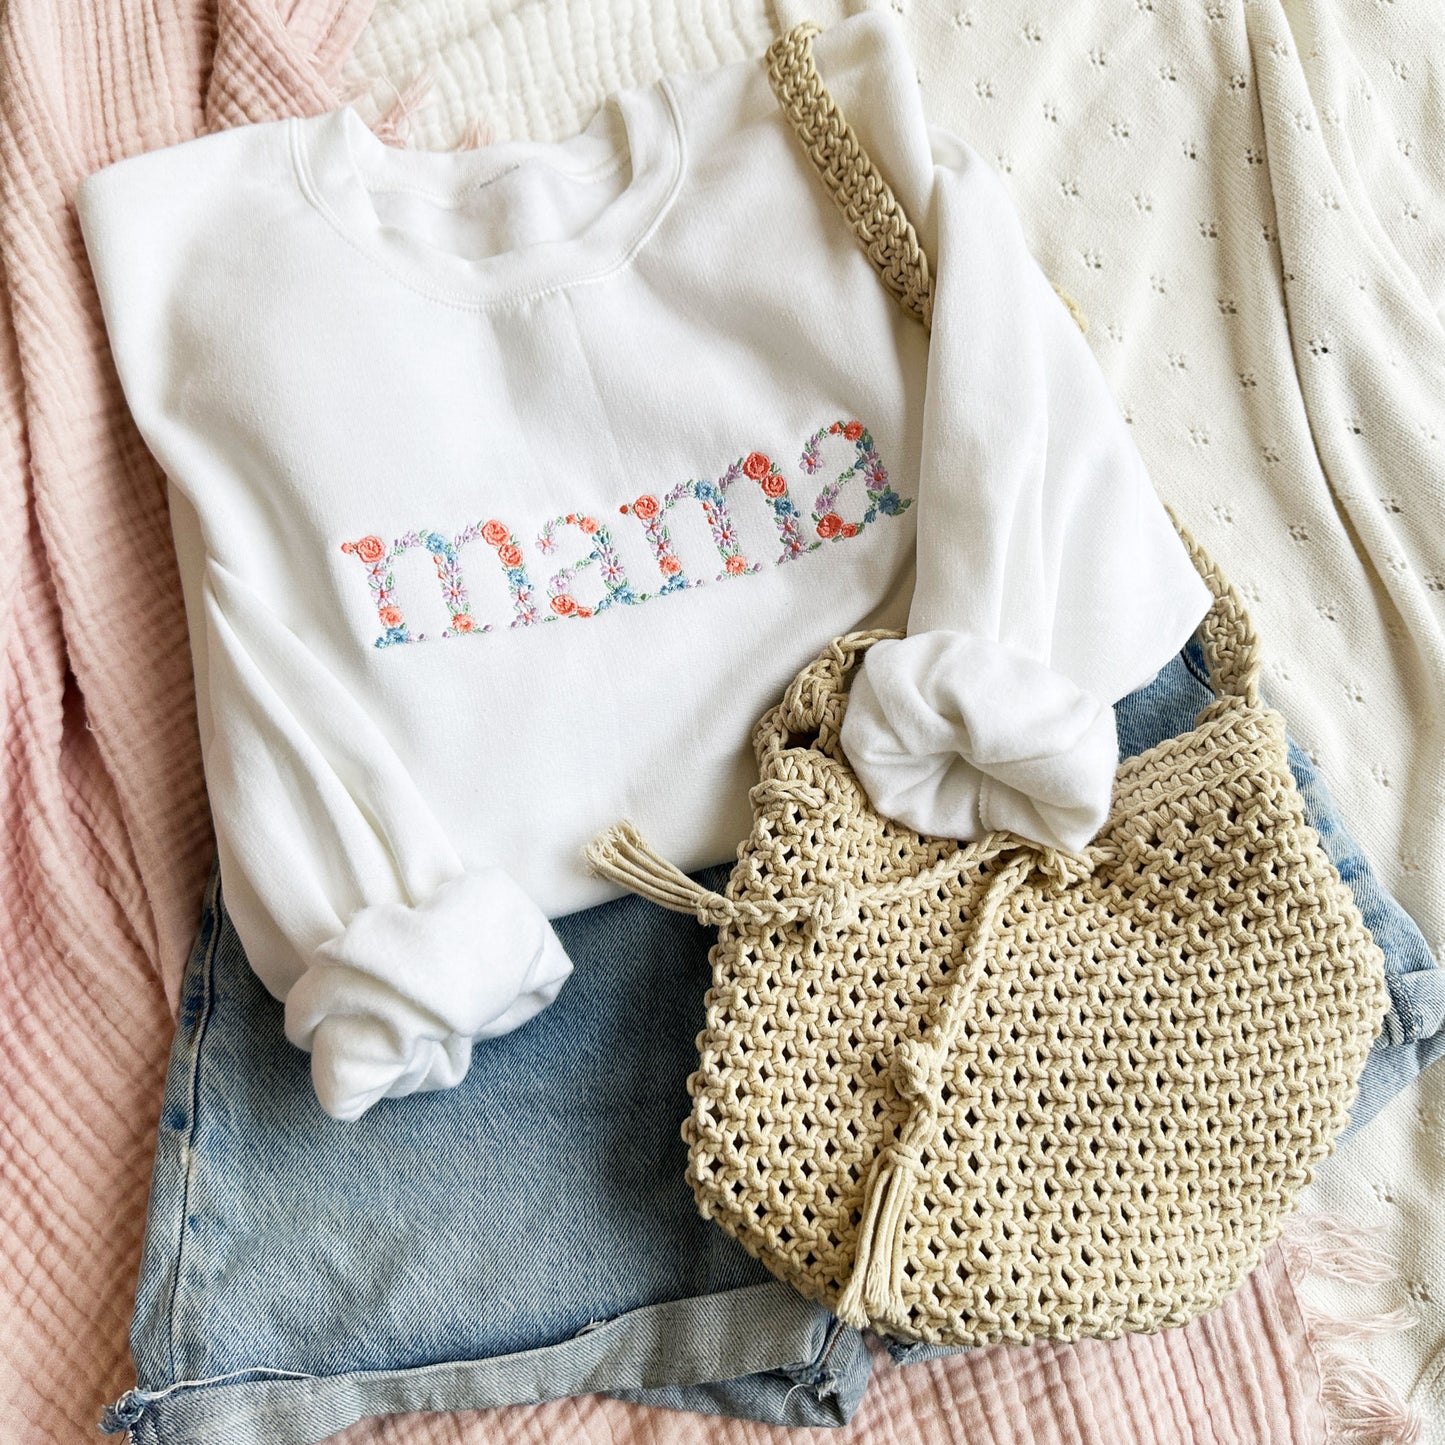 Whit ecrewneck sweatshirt with embroidered floral mama in spring colors styled with jean shorts and a cute purse!